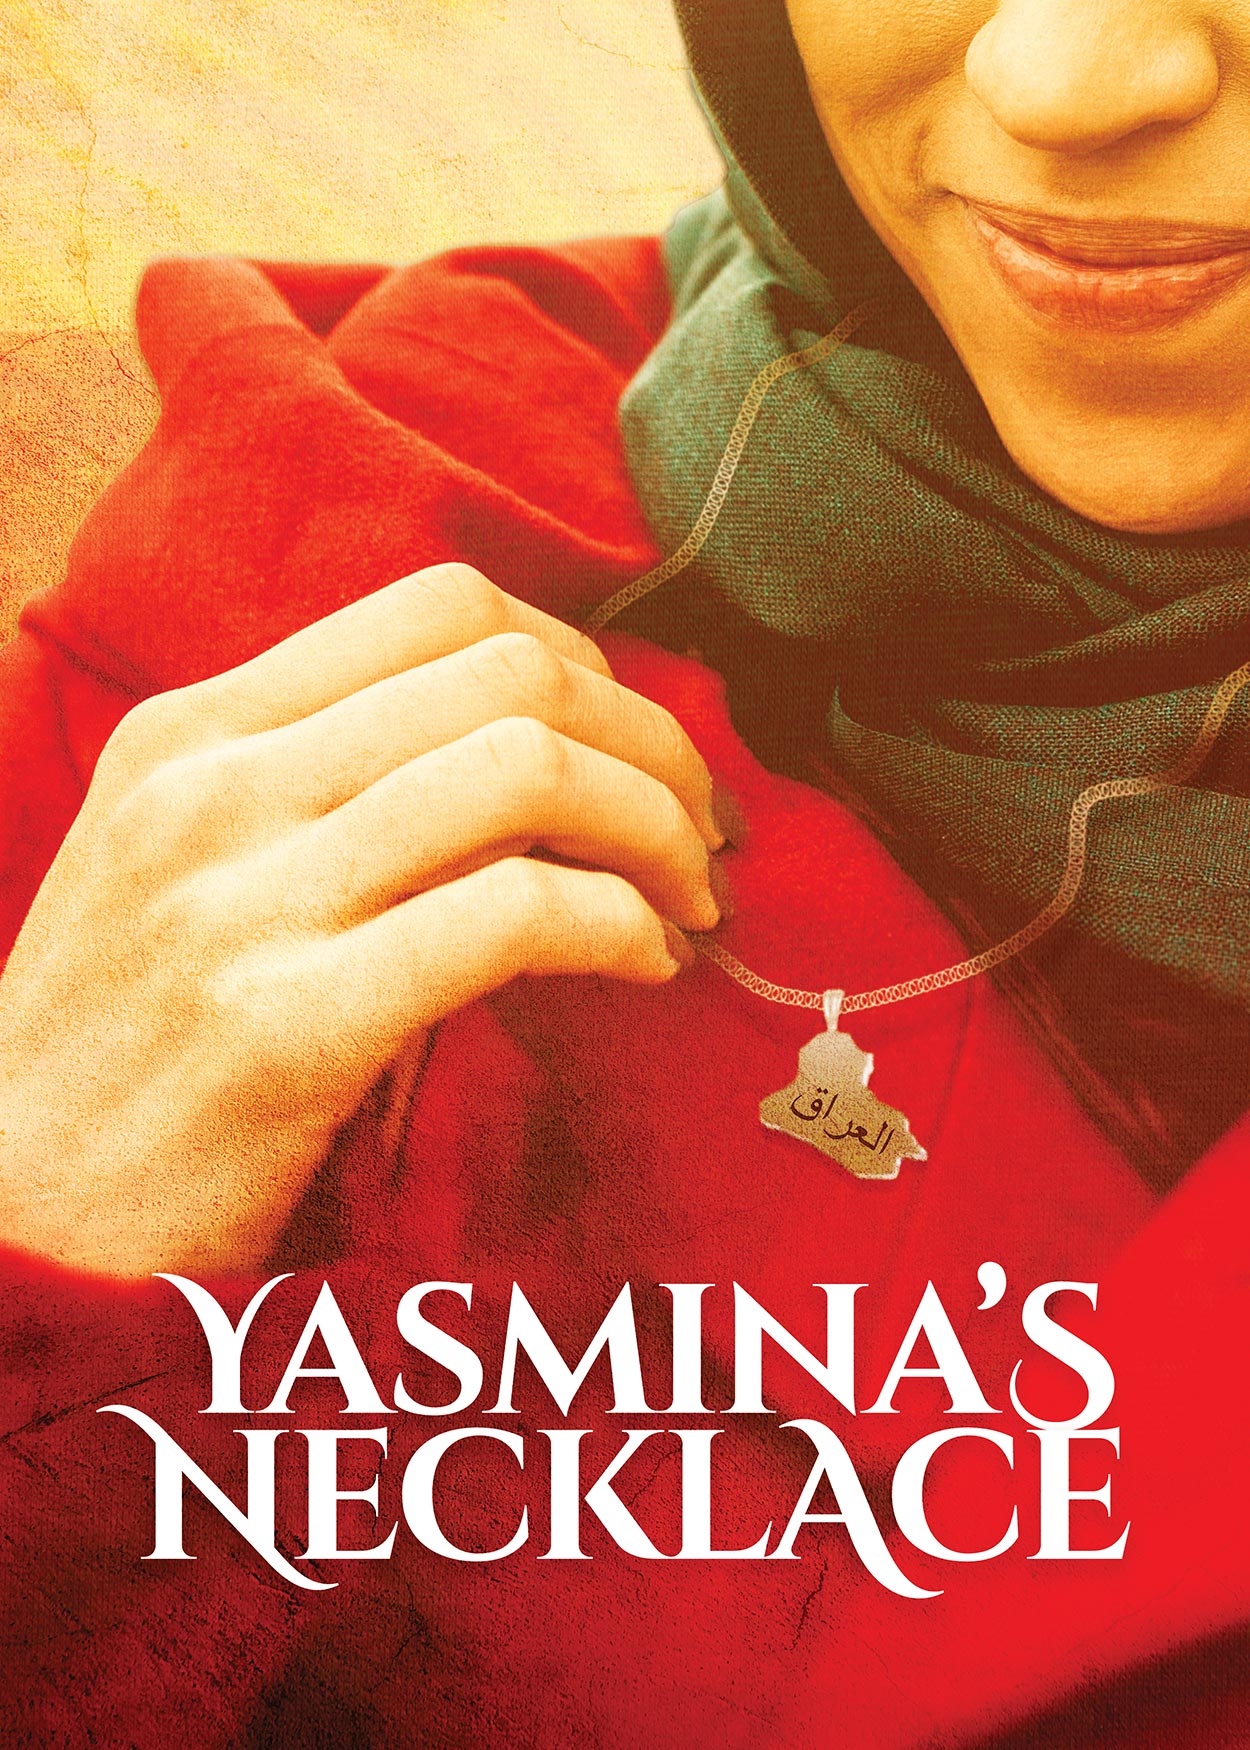 Key Art from Yasmina's Necklace (2019). An image of a woman wearing a gray hijab and red jacket. The image is cut off right above the woman's nose. She is holding a necklace she is wearing. The charm on the necklace is in the shape of Iraq.